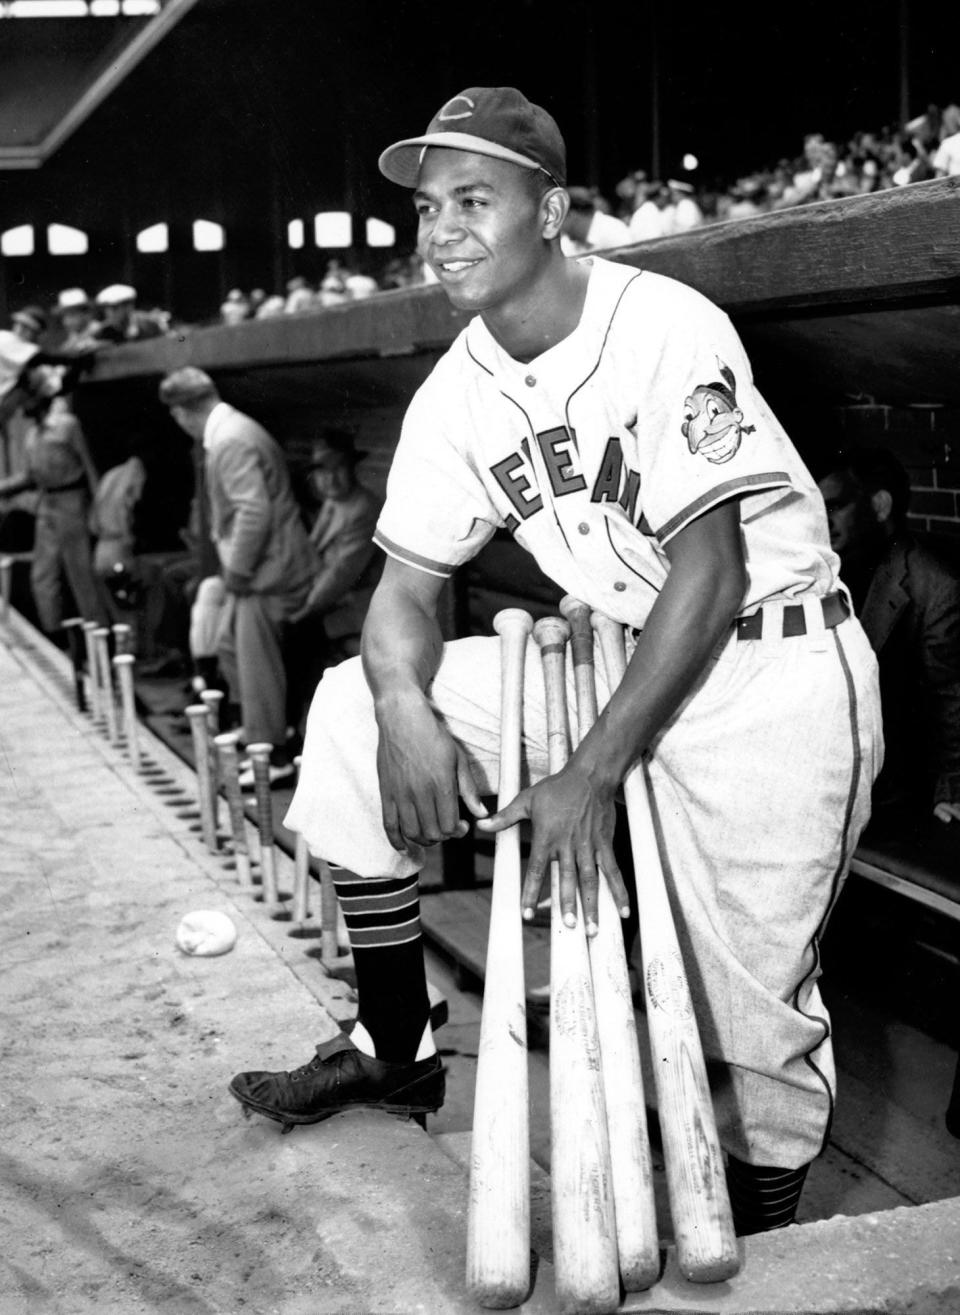 Larry Doby, the first Black player in the American League, poses proudly in his Cleveland uniform in the dugout in Comiskey Park in Chicago, Ill., on July 5, 1947.